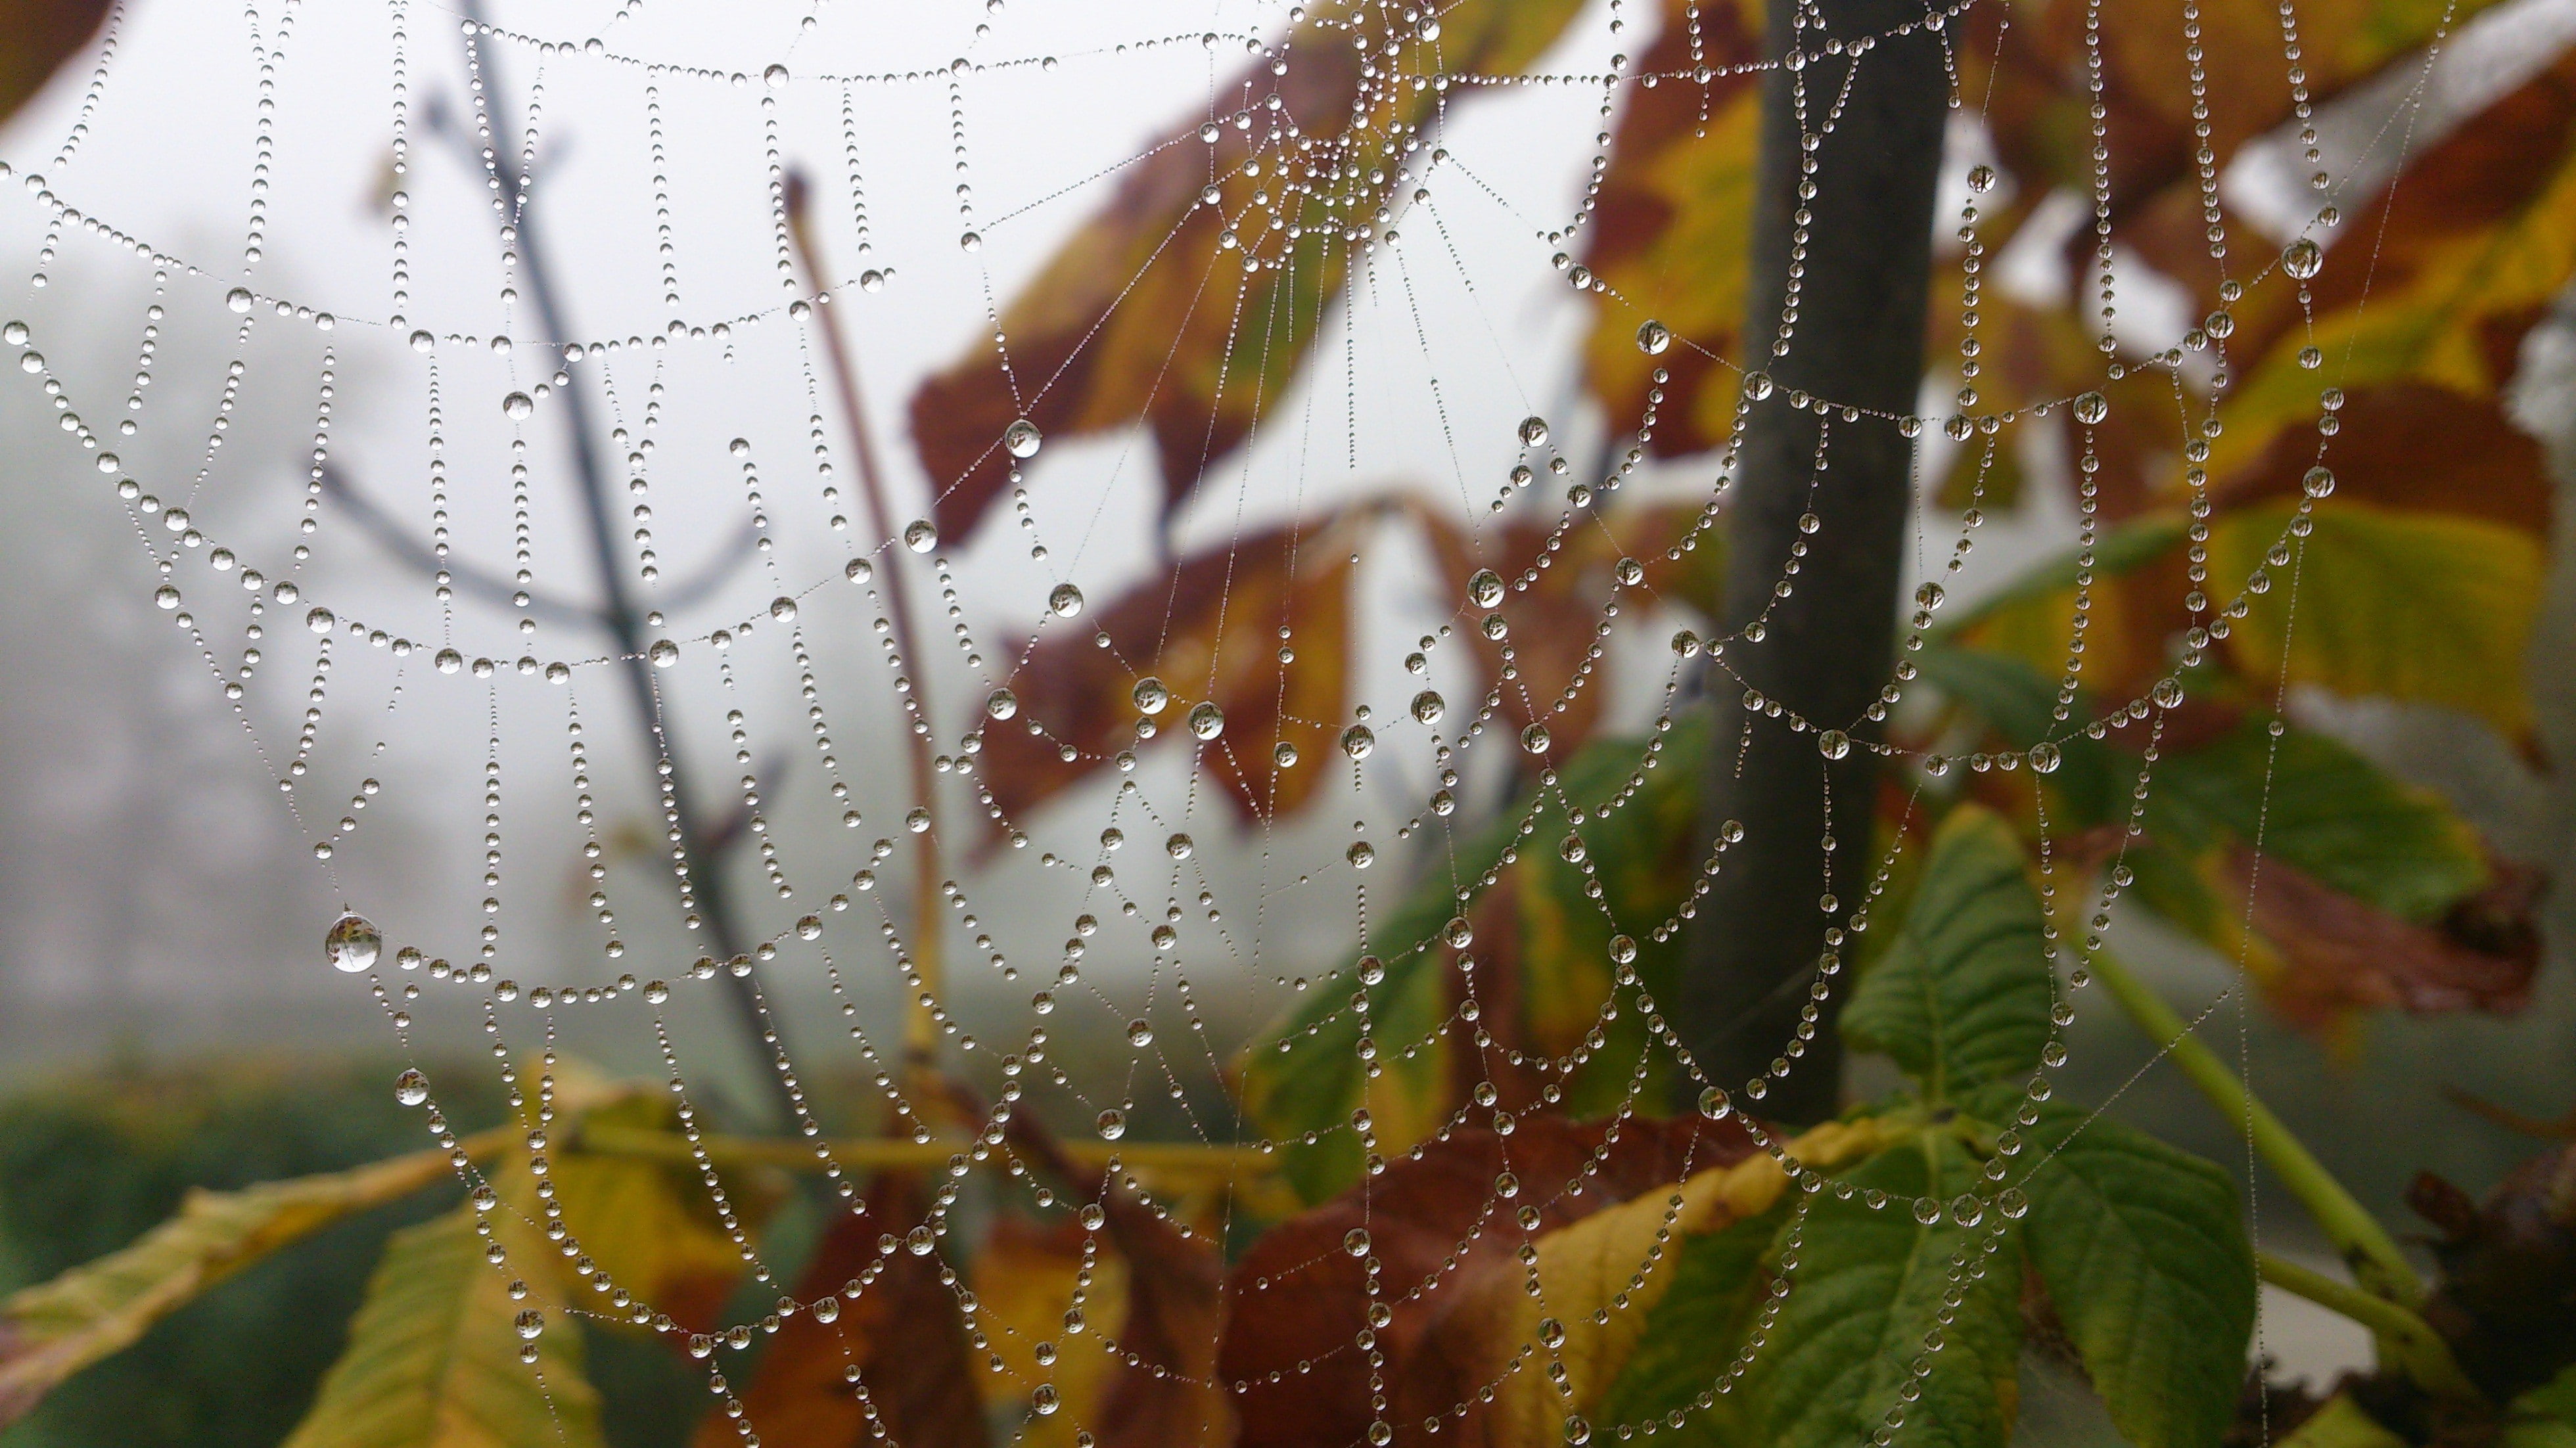 Spiderwebs, Water Drops, Nature, Leaves, water droplets on spiderweb